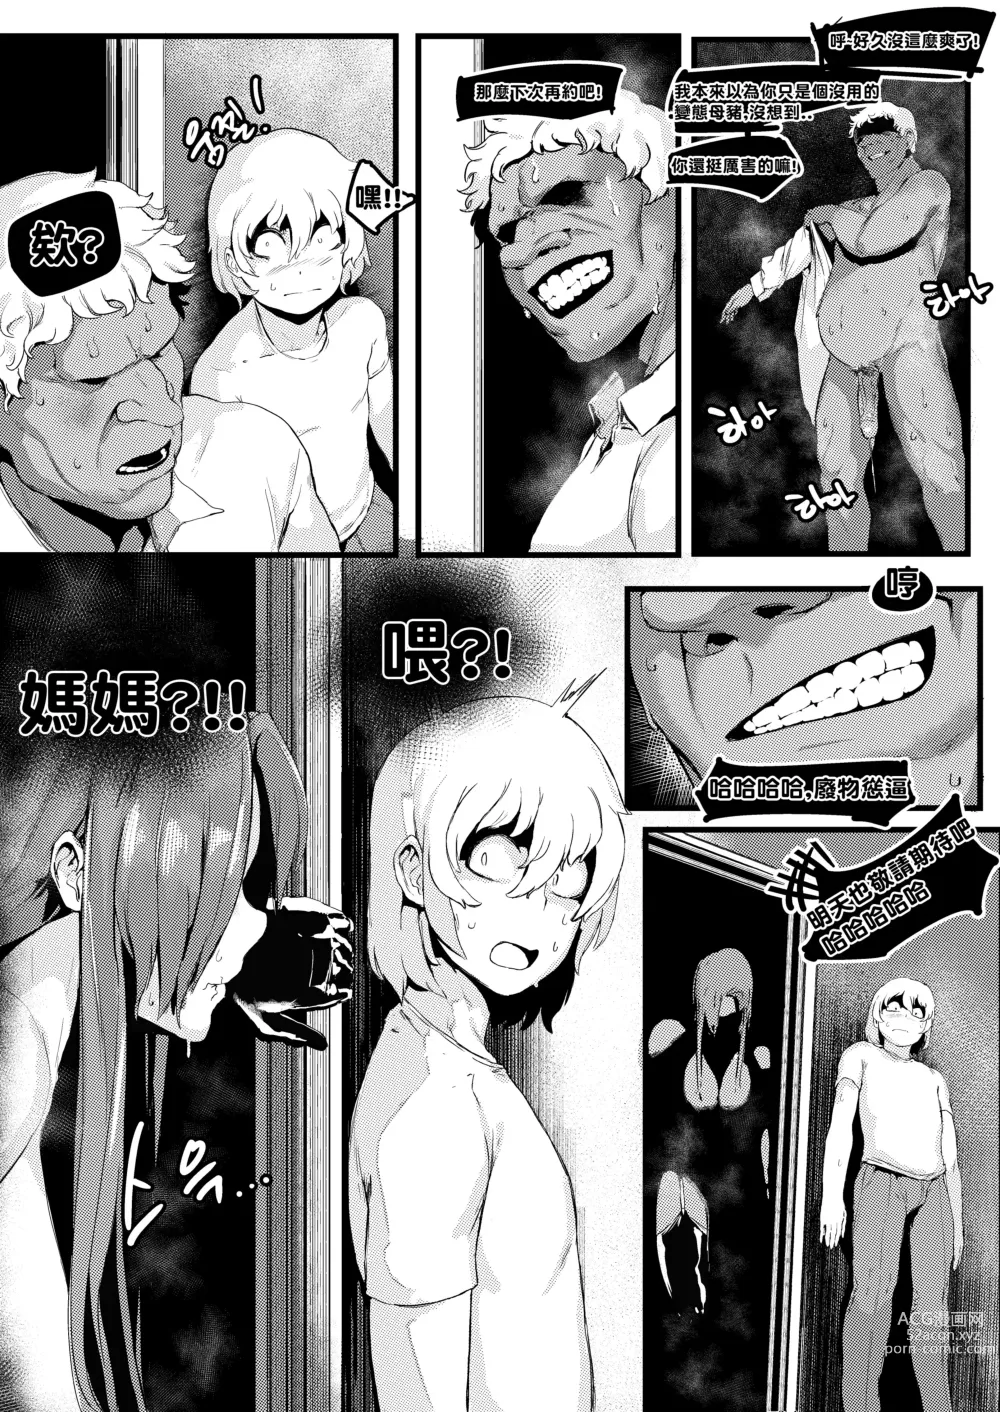 Page 16 of doujinshi mtr comission